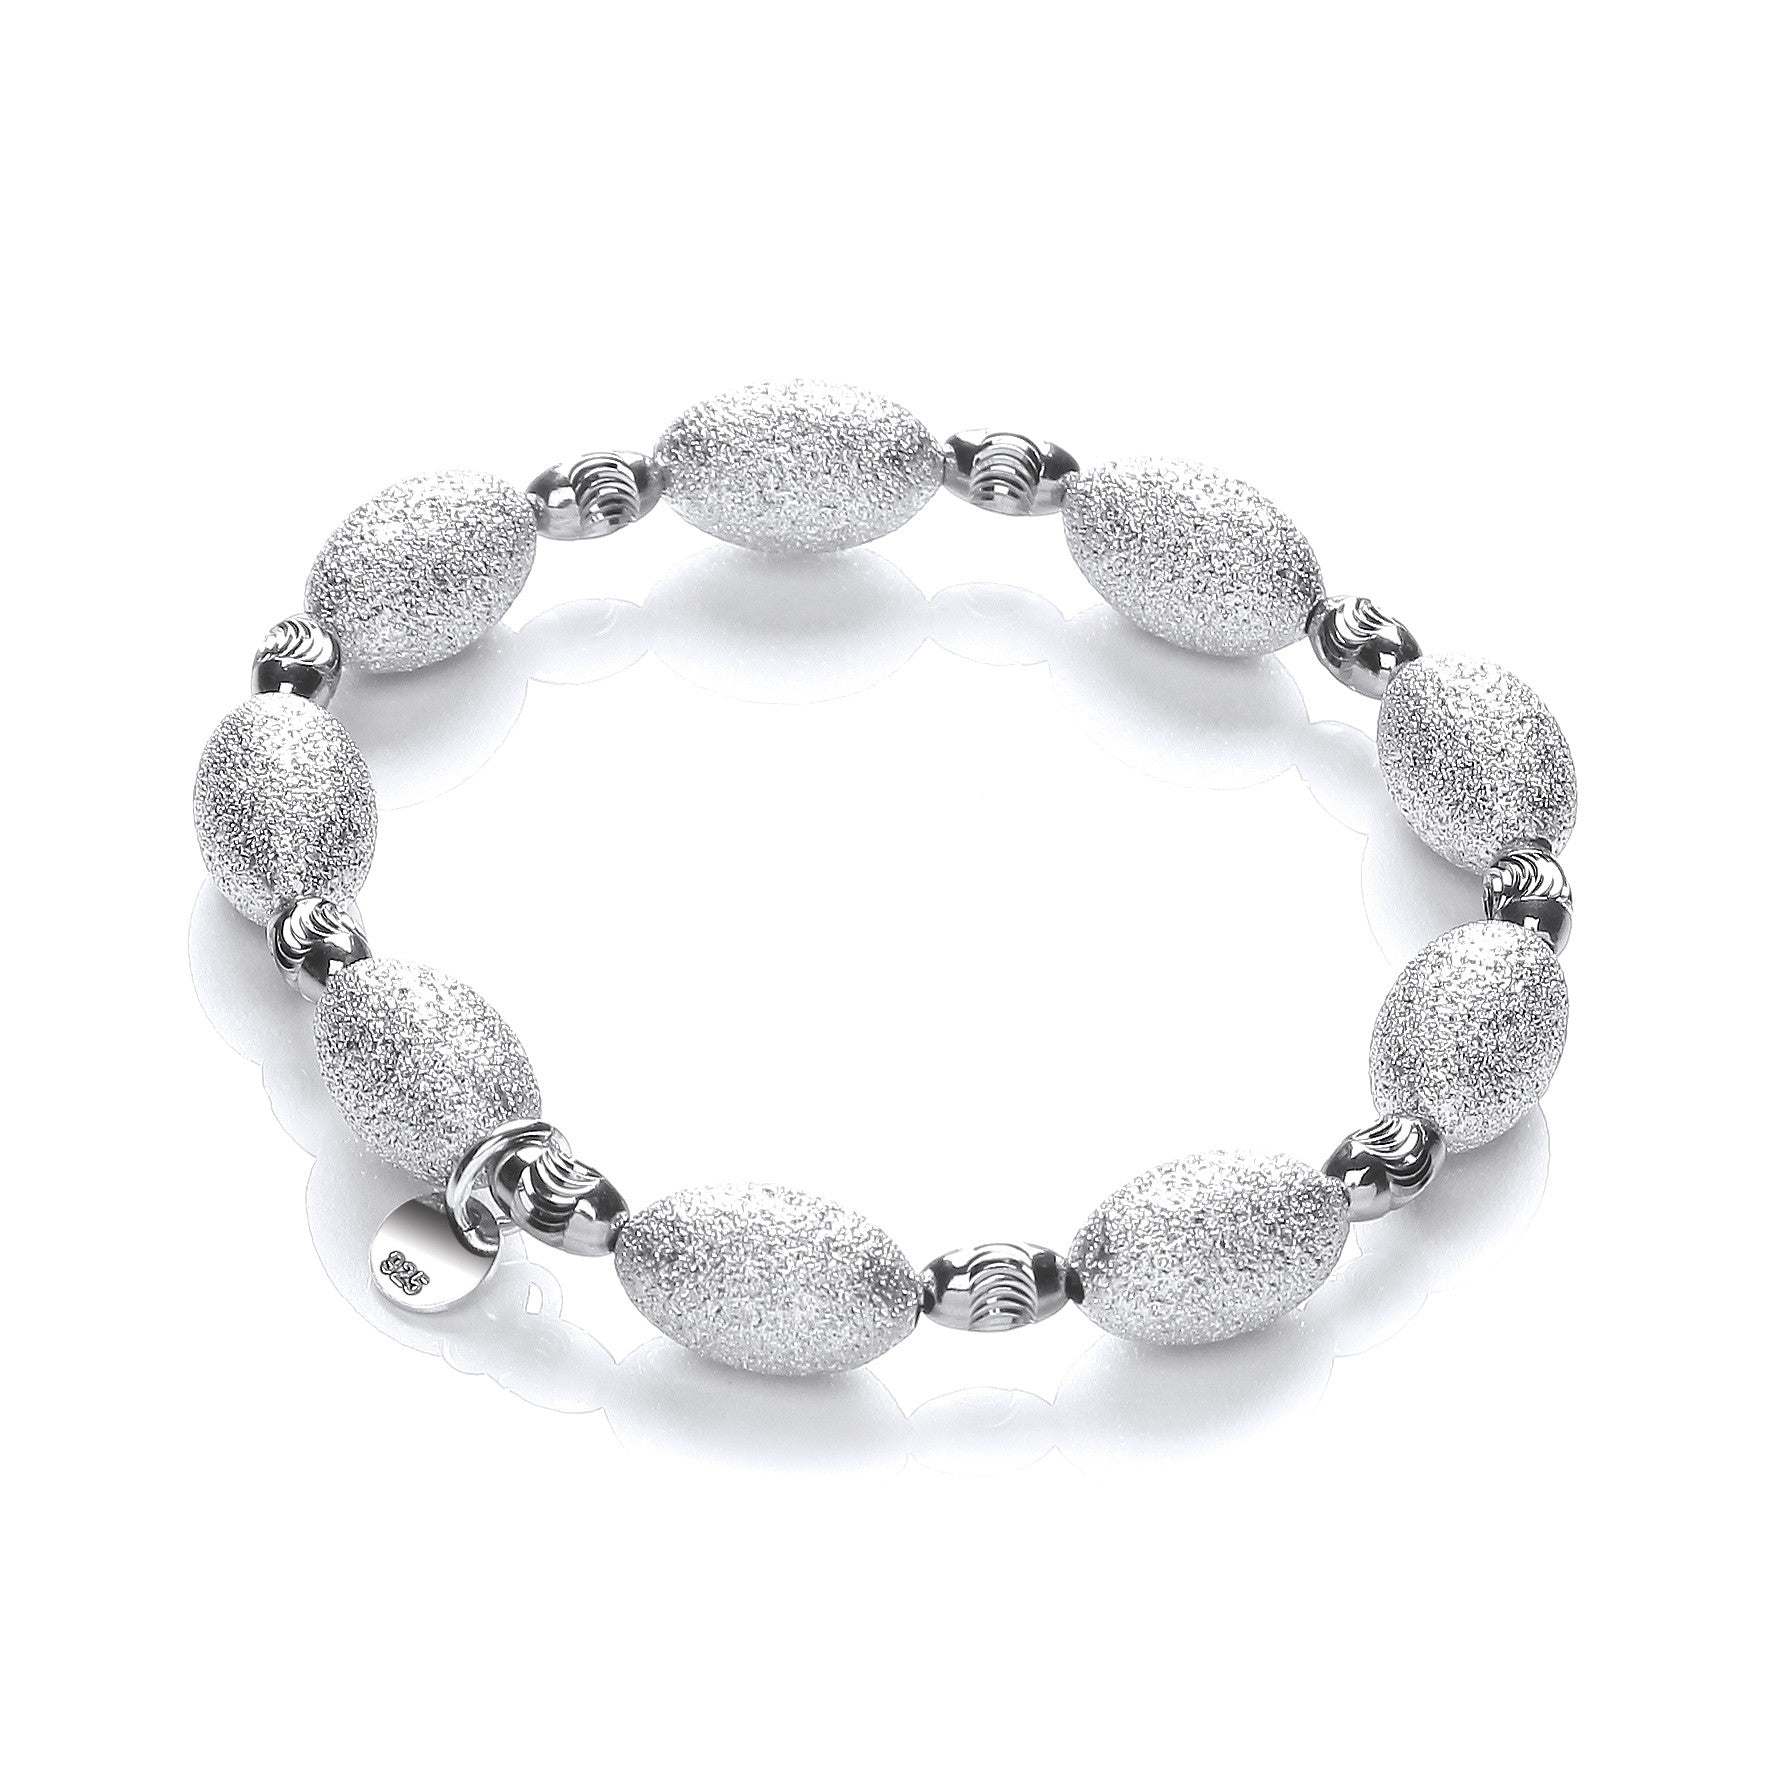 Silver bracelet with Frosted & Ruthenium Beads